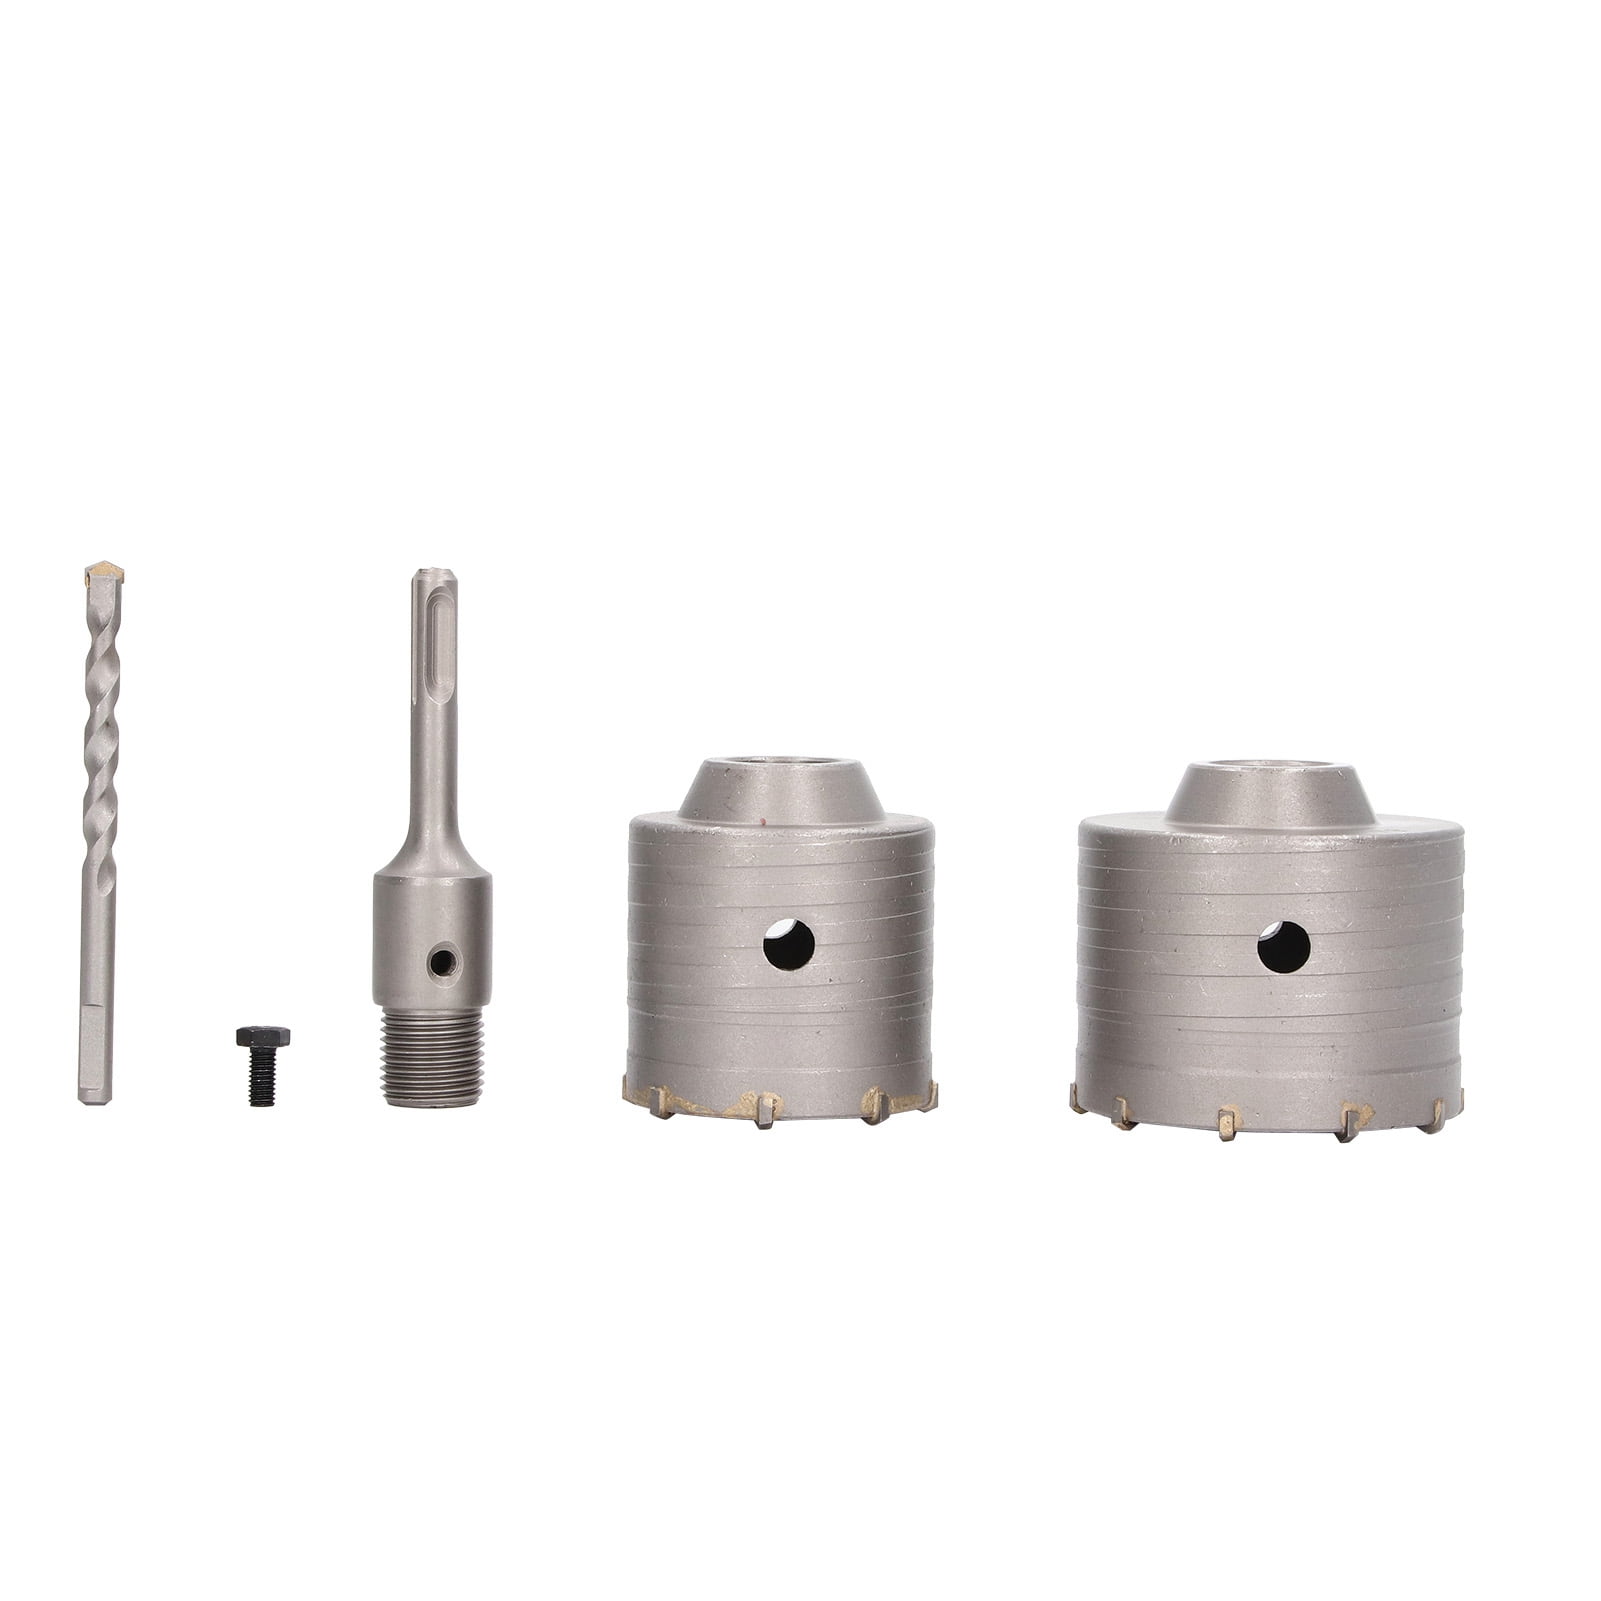 80mm Hole Saw Core Drill Bit & 110mm Round Shank Kit Use For Cement Bricks Wall 